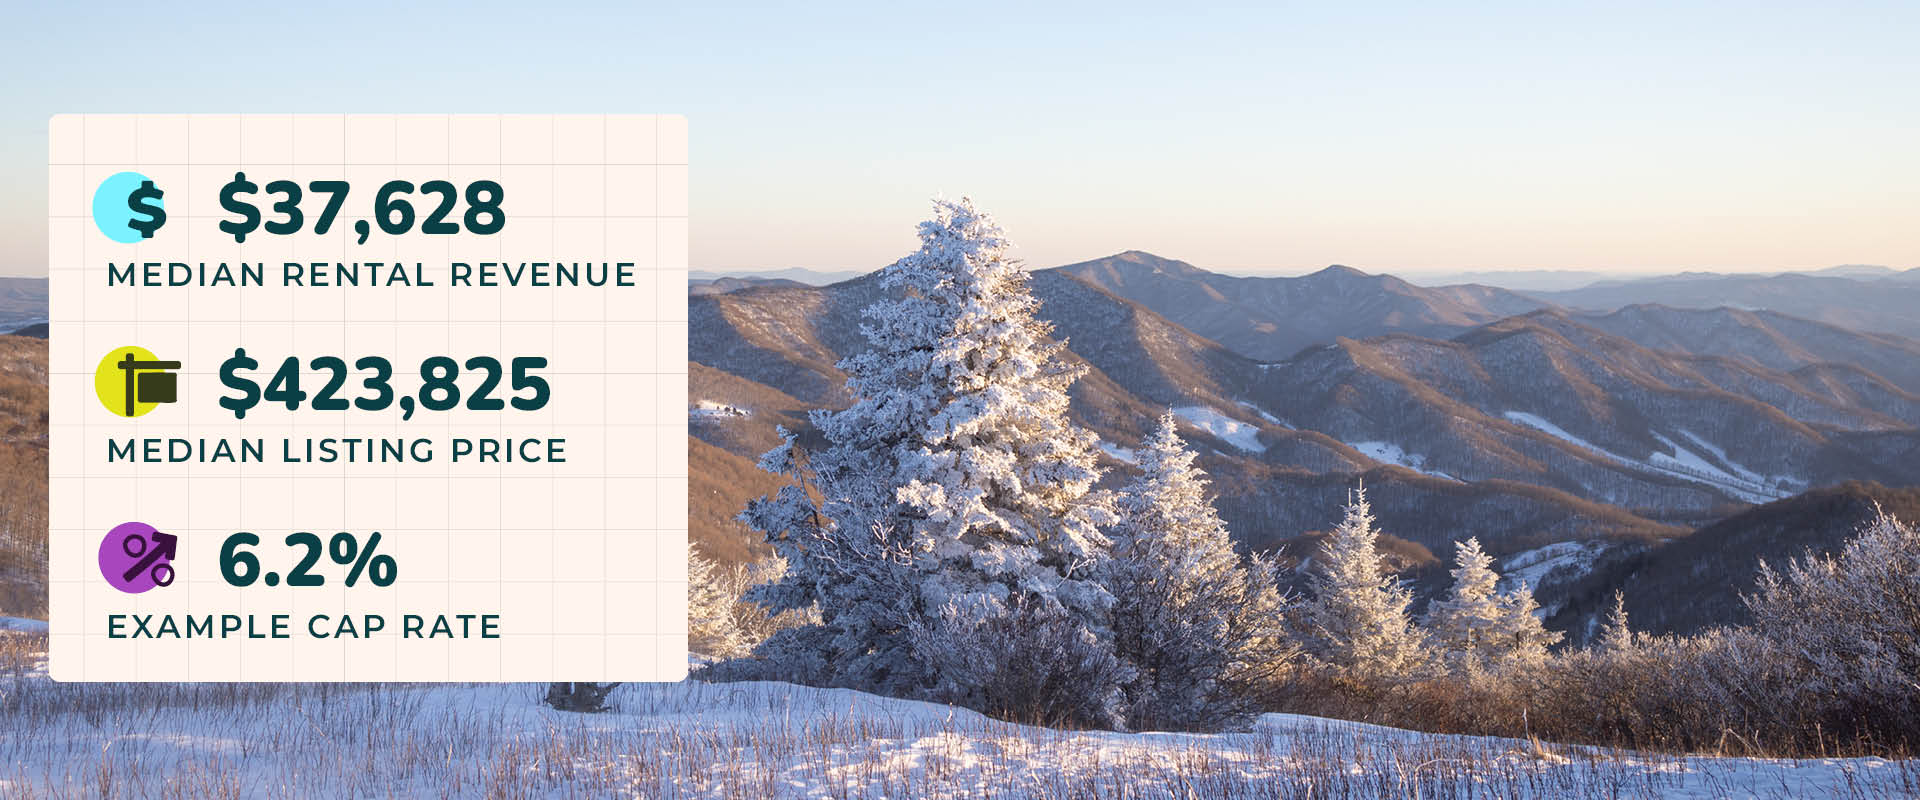 Photo of a winter scene with snow on a pine tree near Boone, North Carolina. Image text reads, "$37,628 median rental revenue. $423,825 median listing price. 6.2% example cap rate."